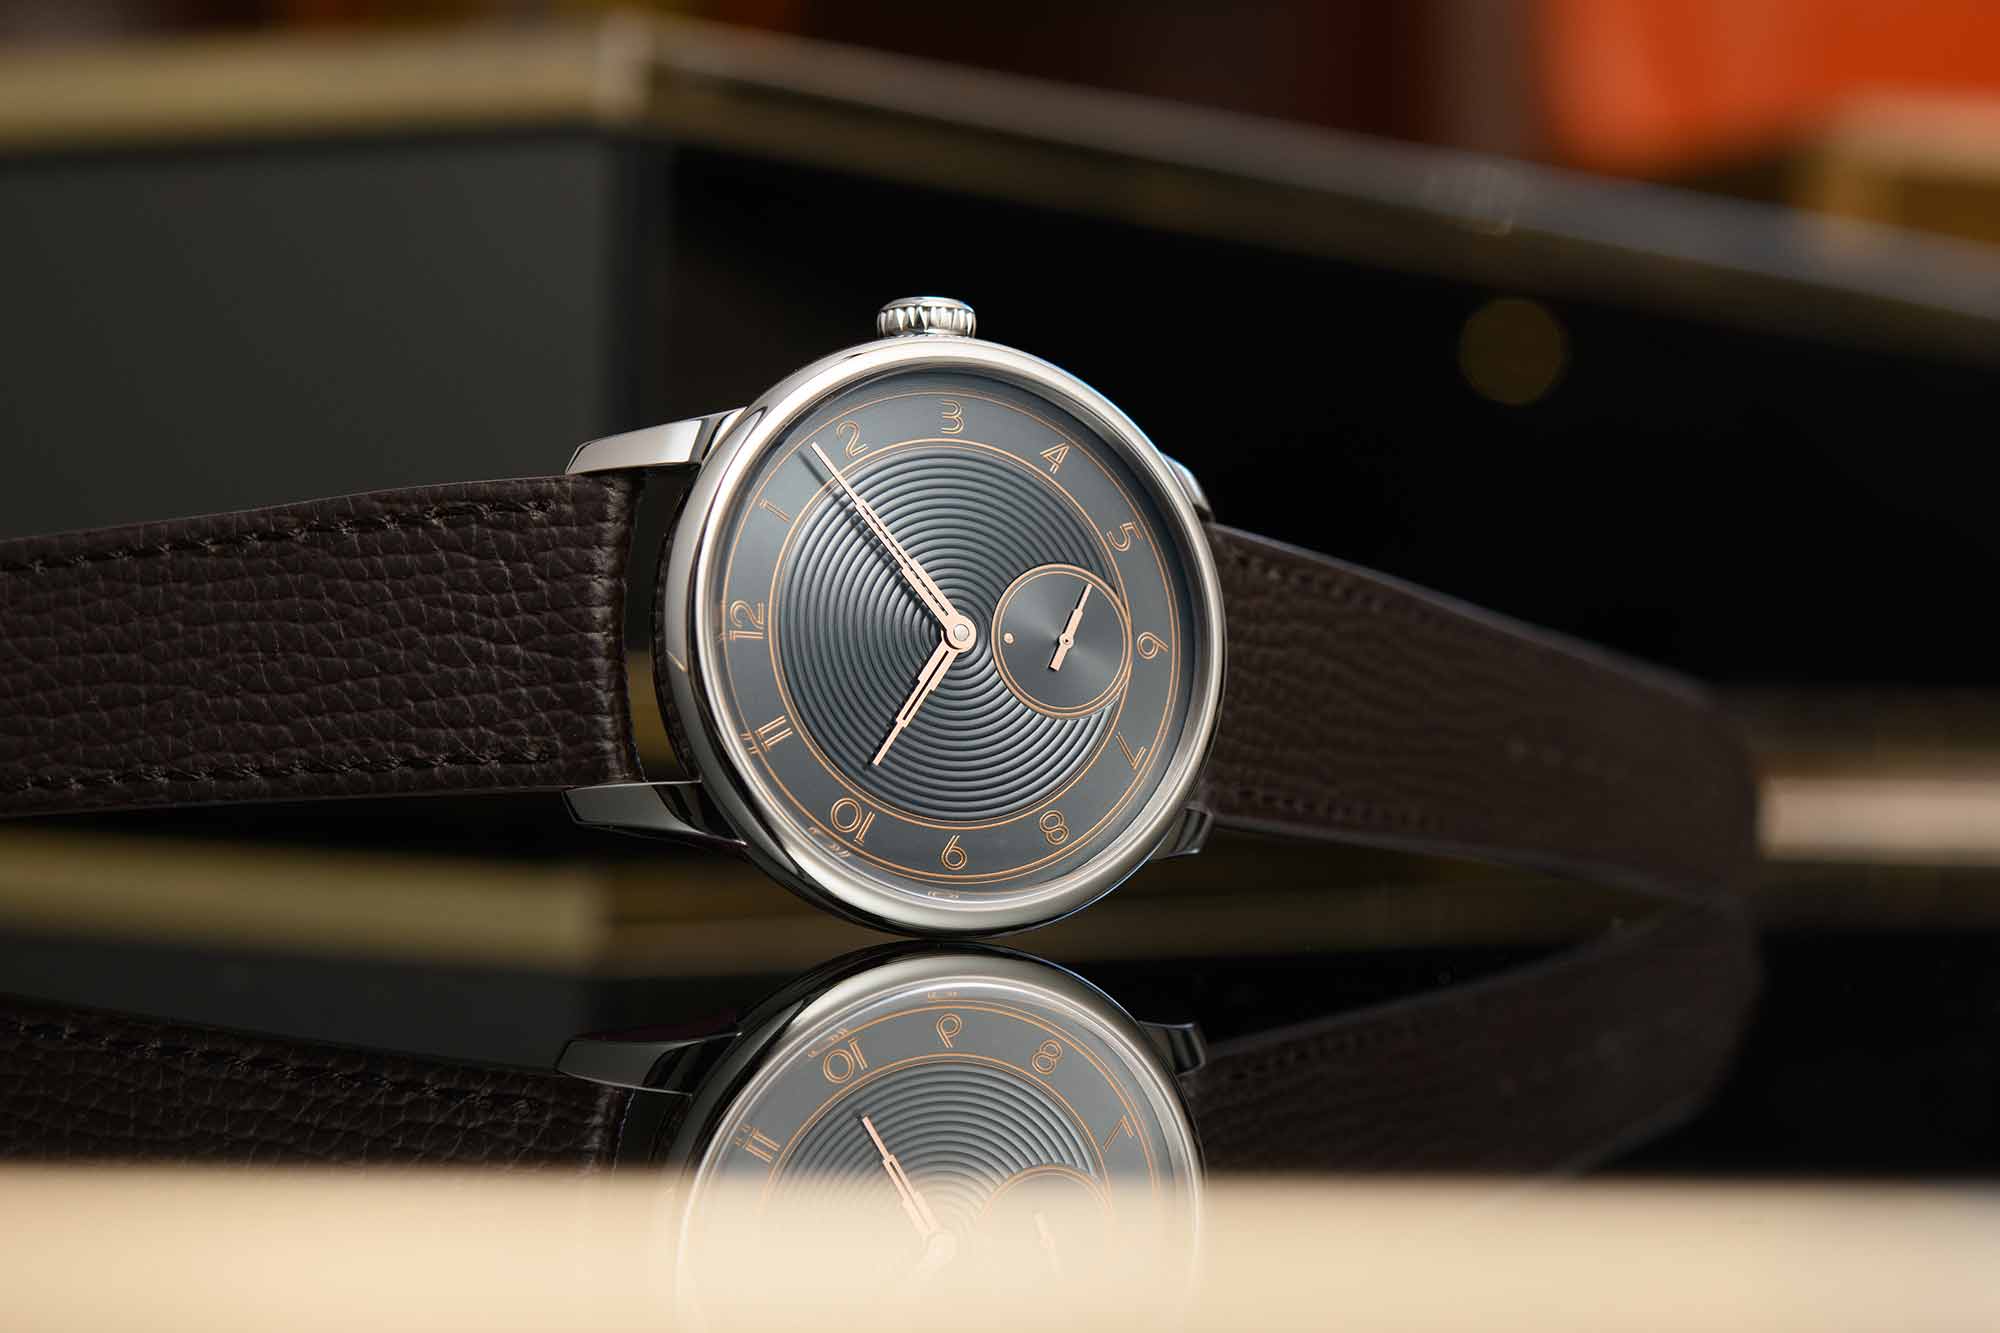 Introducing The Louis Erard Excellence Guilloché Main - Worn & Wound